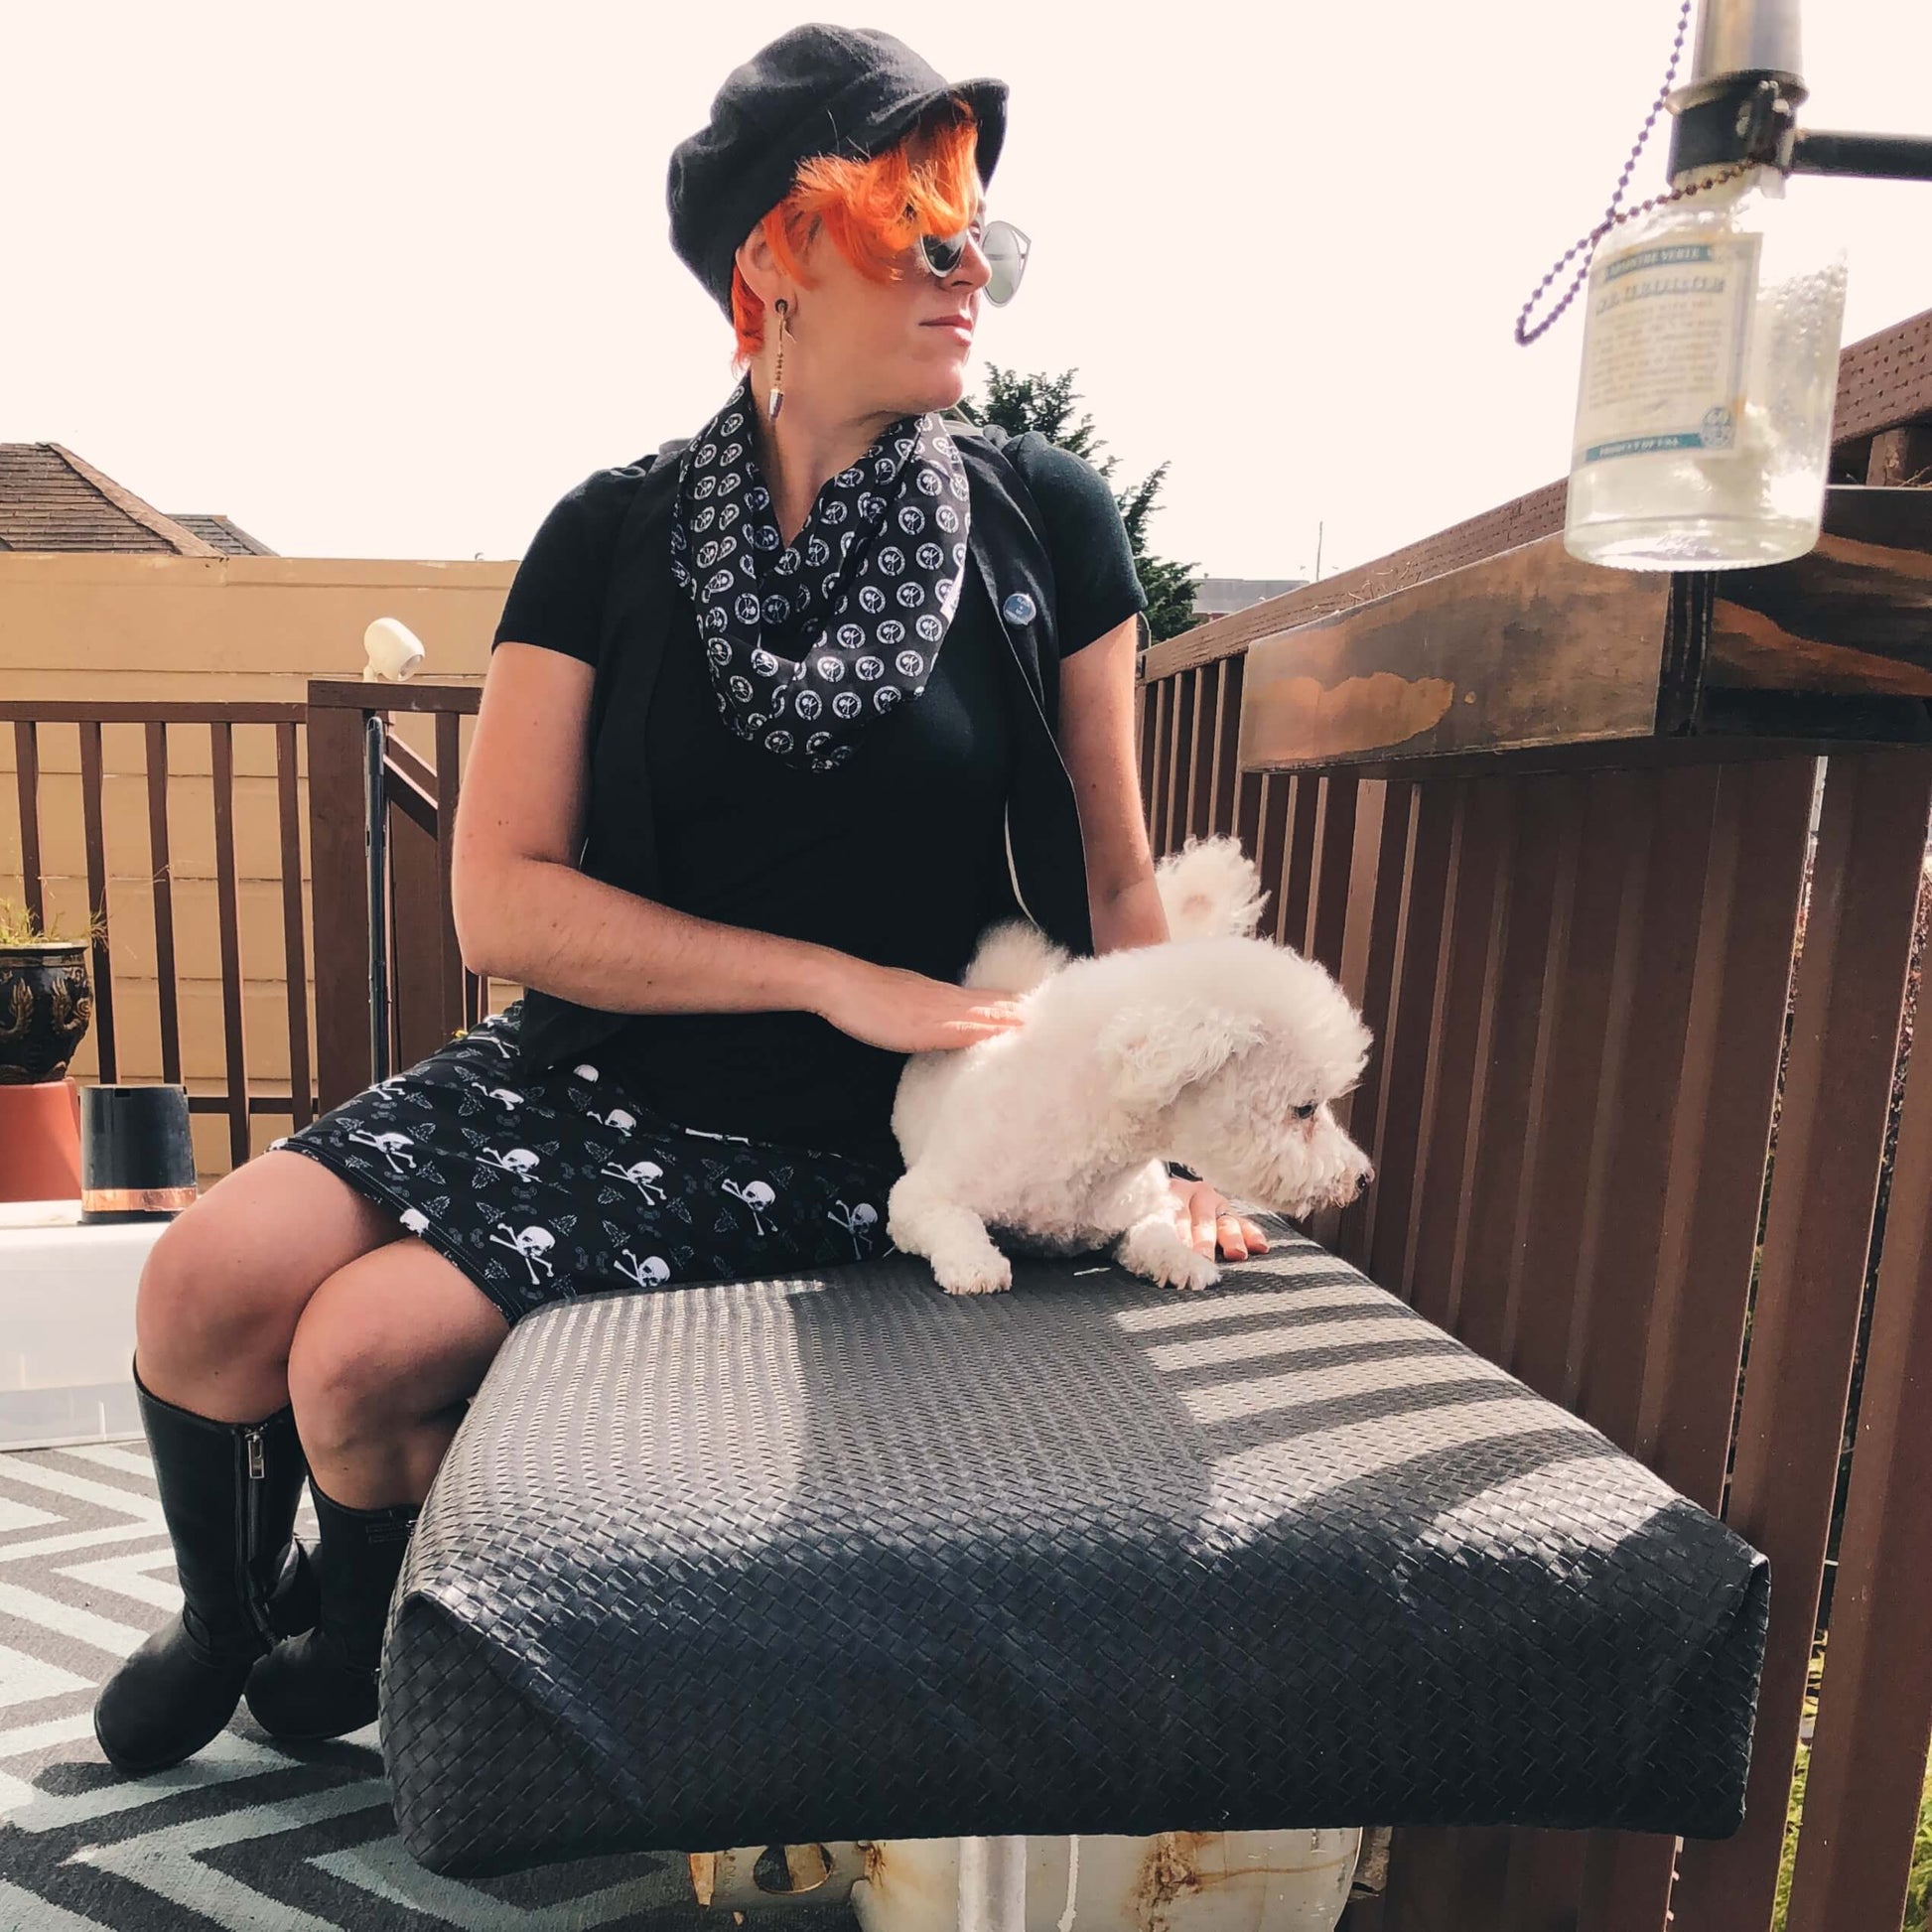 Woman with orange hair and hat with dog wearing skull and crossbones skirt